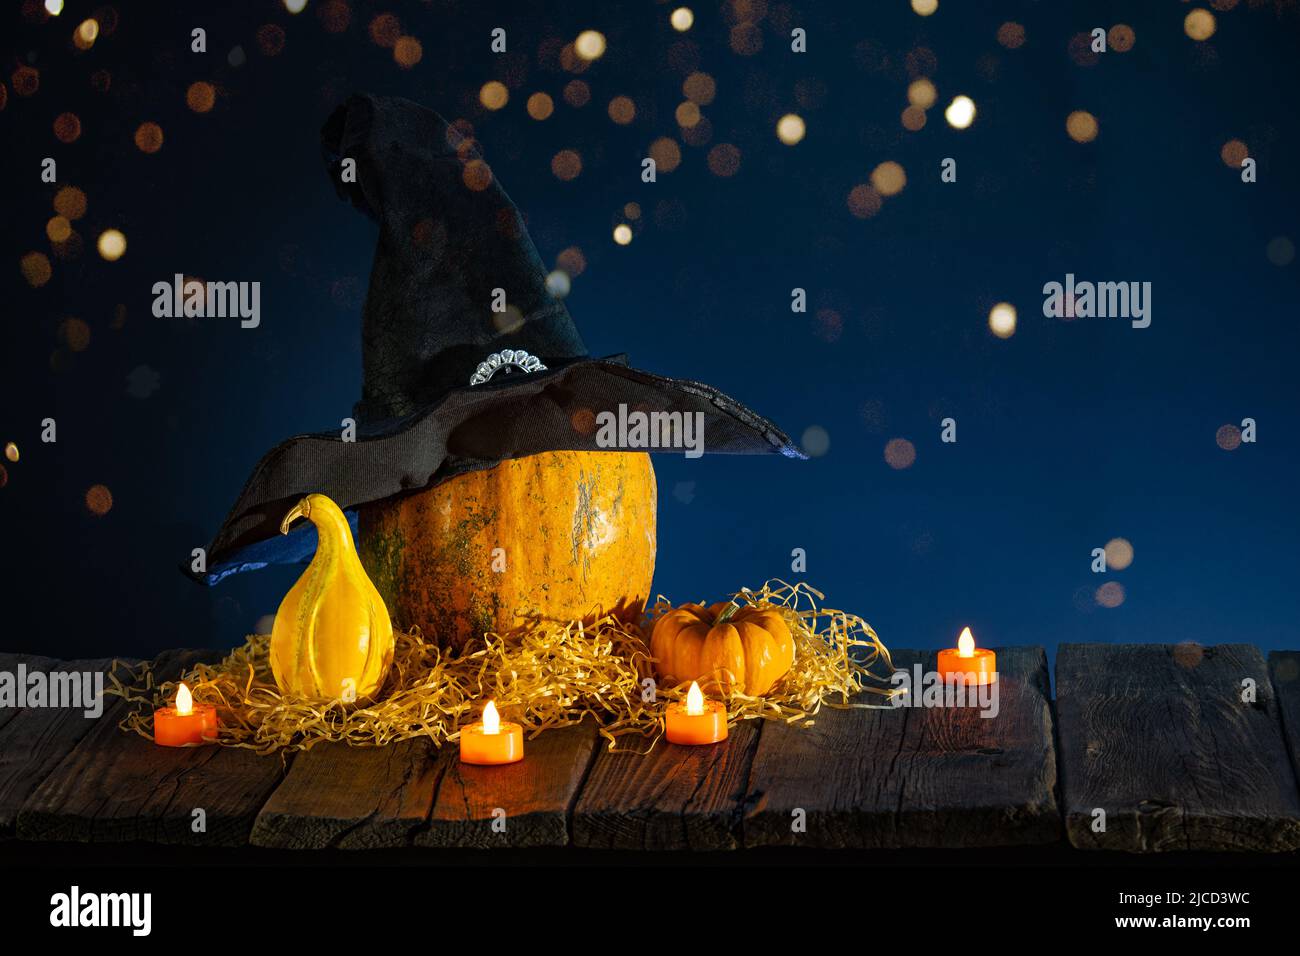 Halloween background with pumpkins, candles on wooden table and bokeh Stock Photo